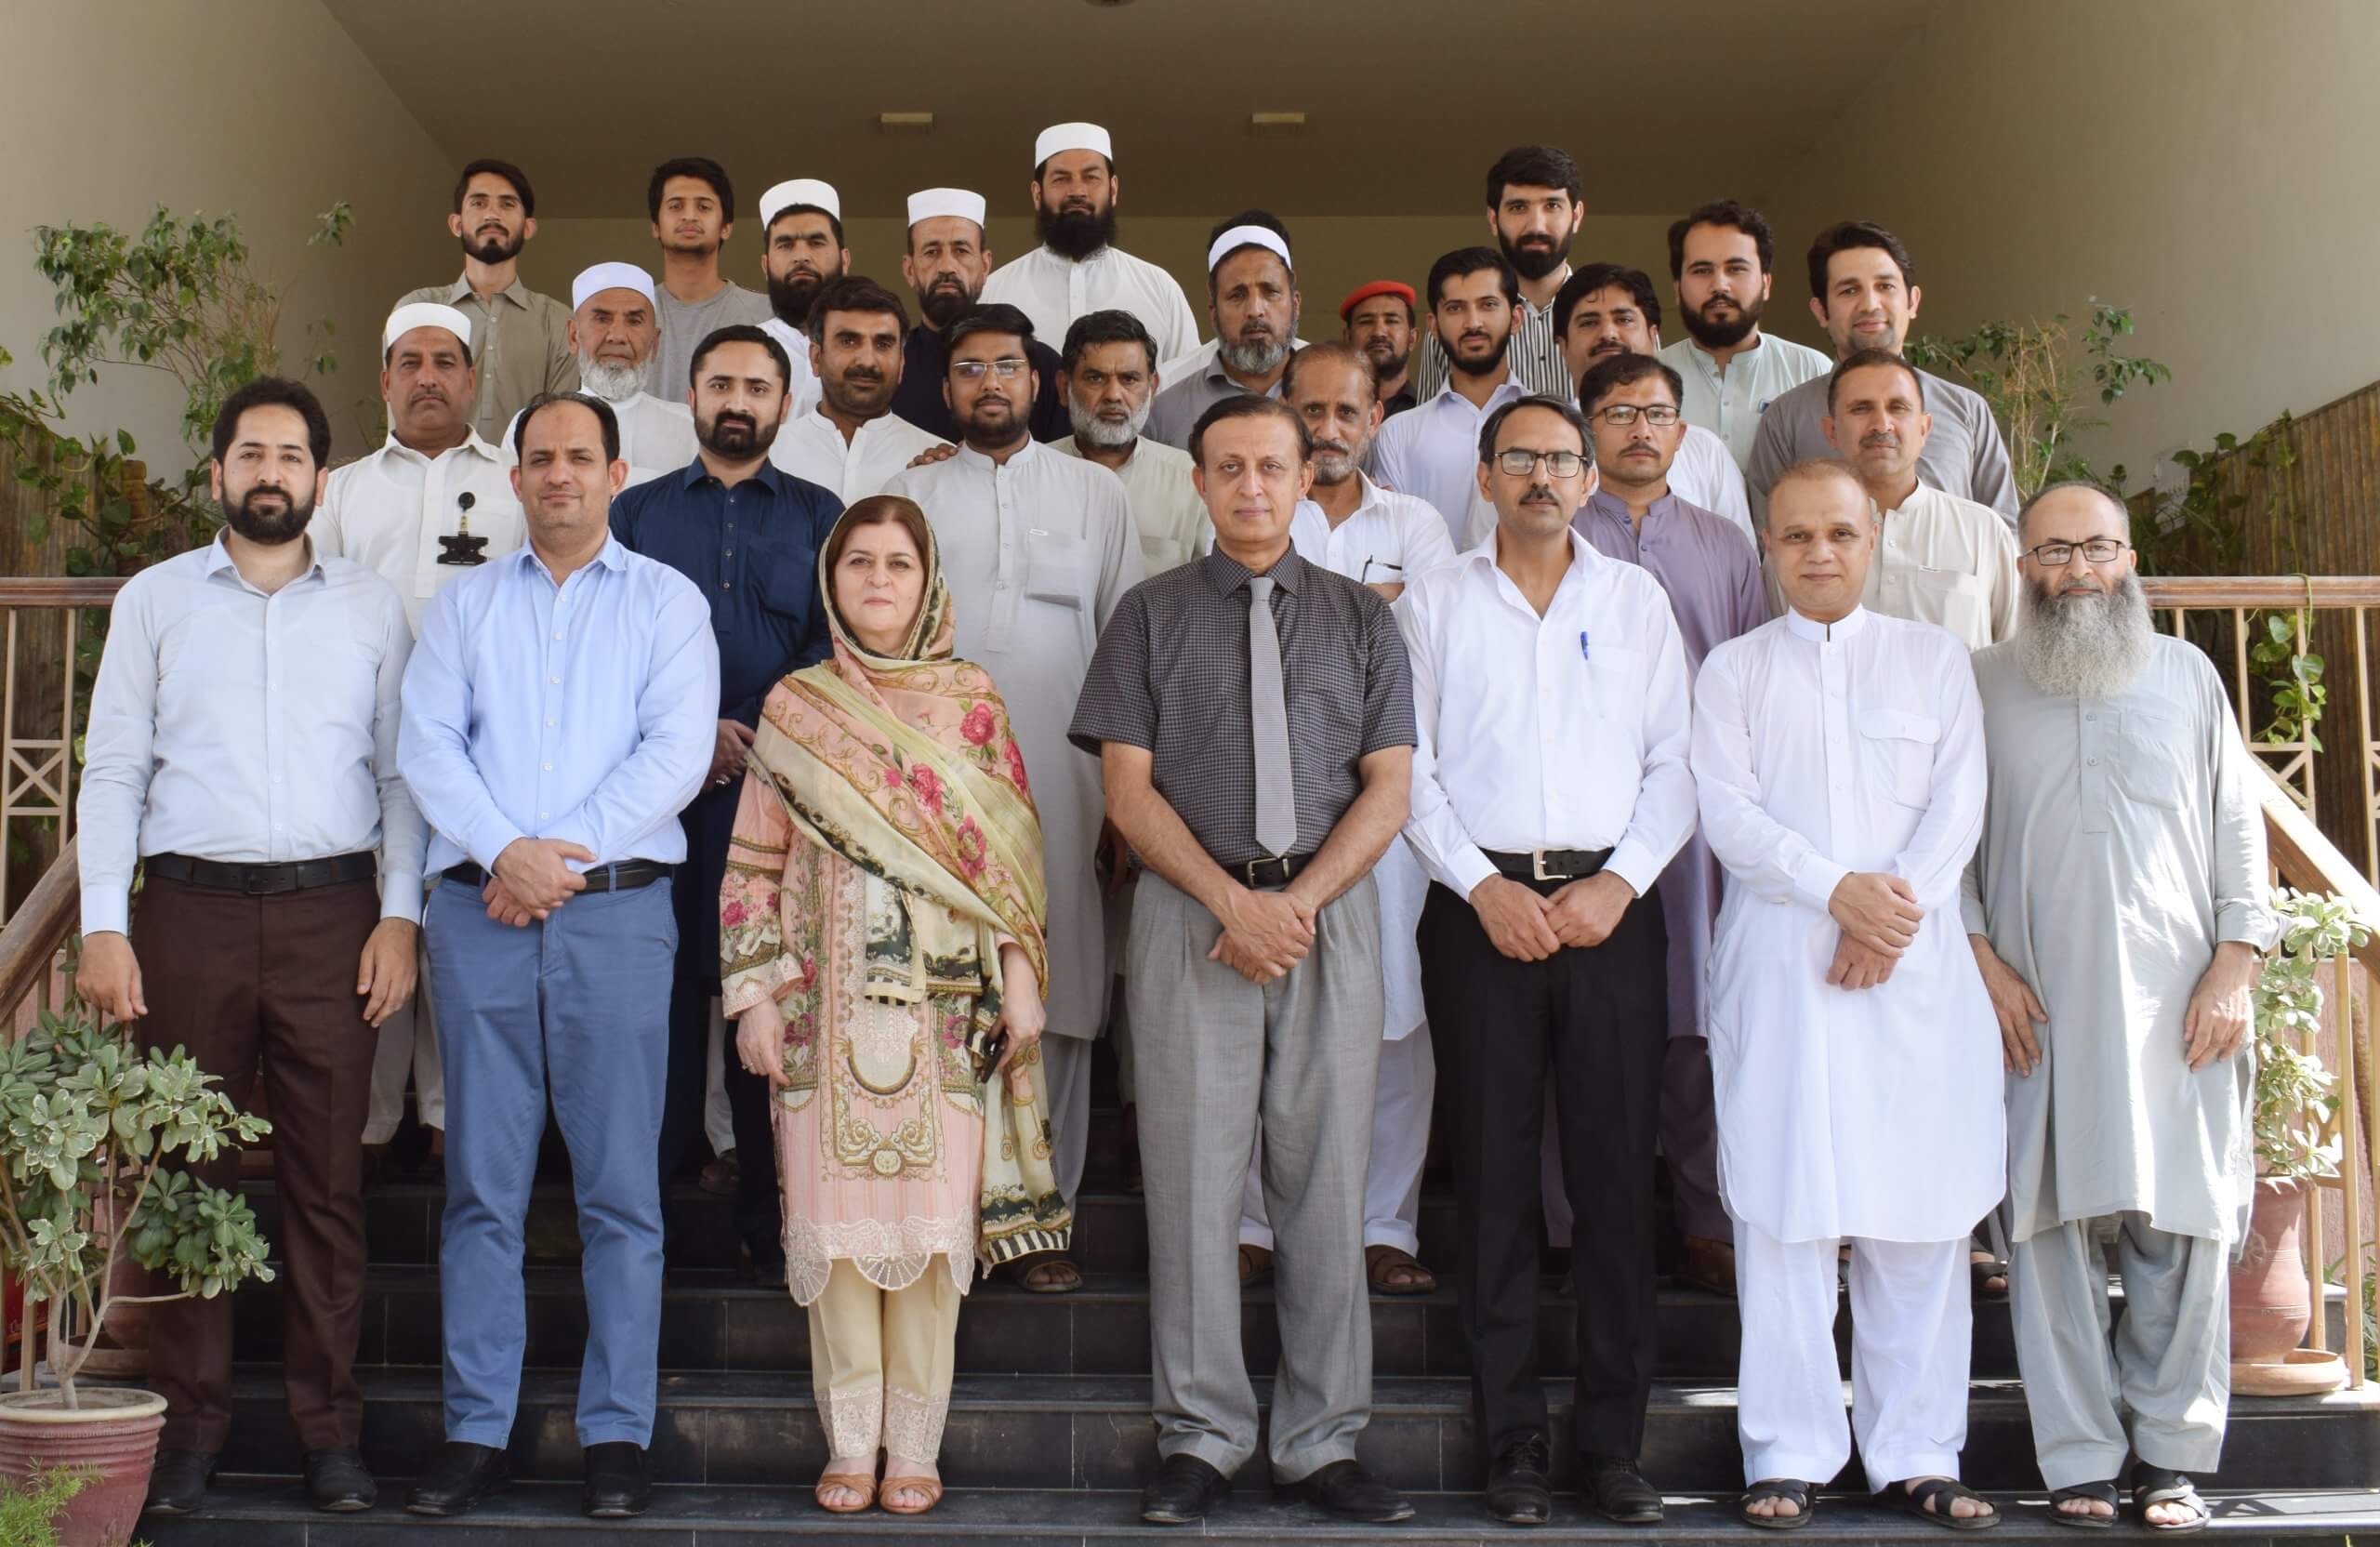 Group Picture of PGMI Staff with Honorable CEO. Prof. Dr. M. Arif Khan and Deputy CEO, Dr. Hamid Ahmad